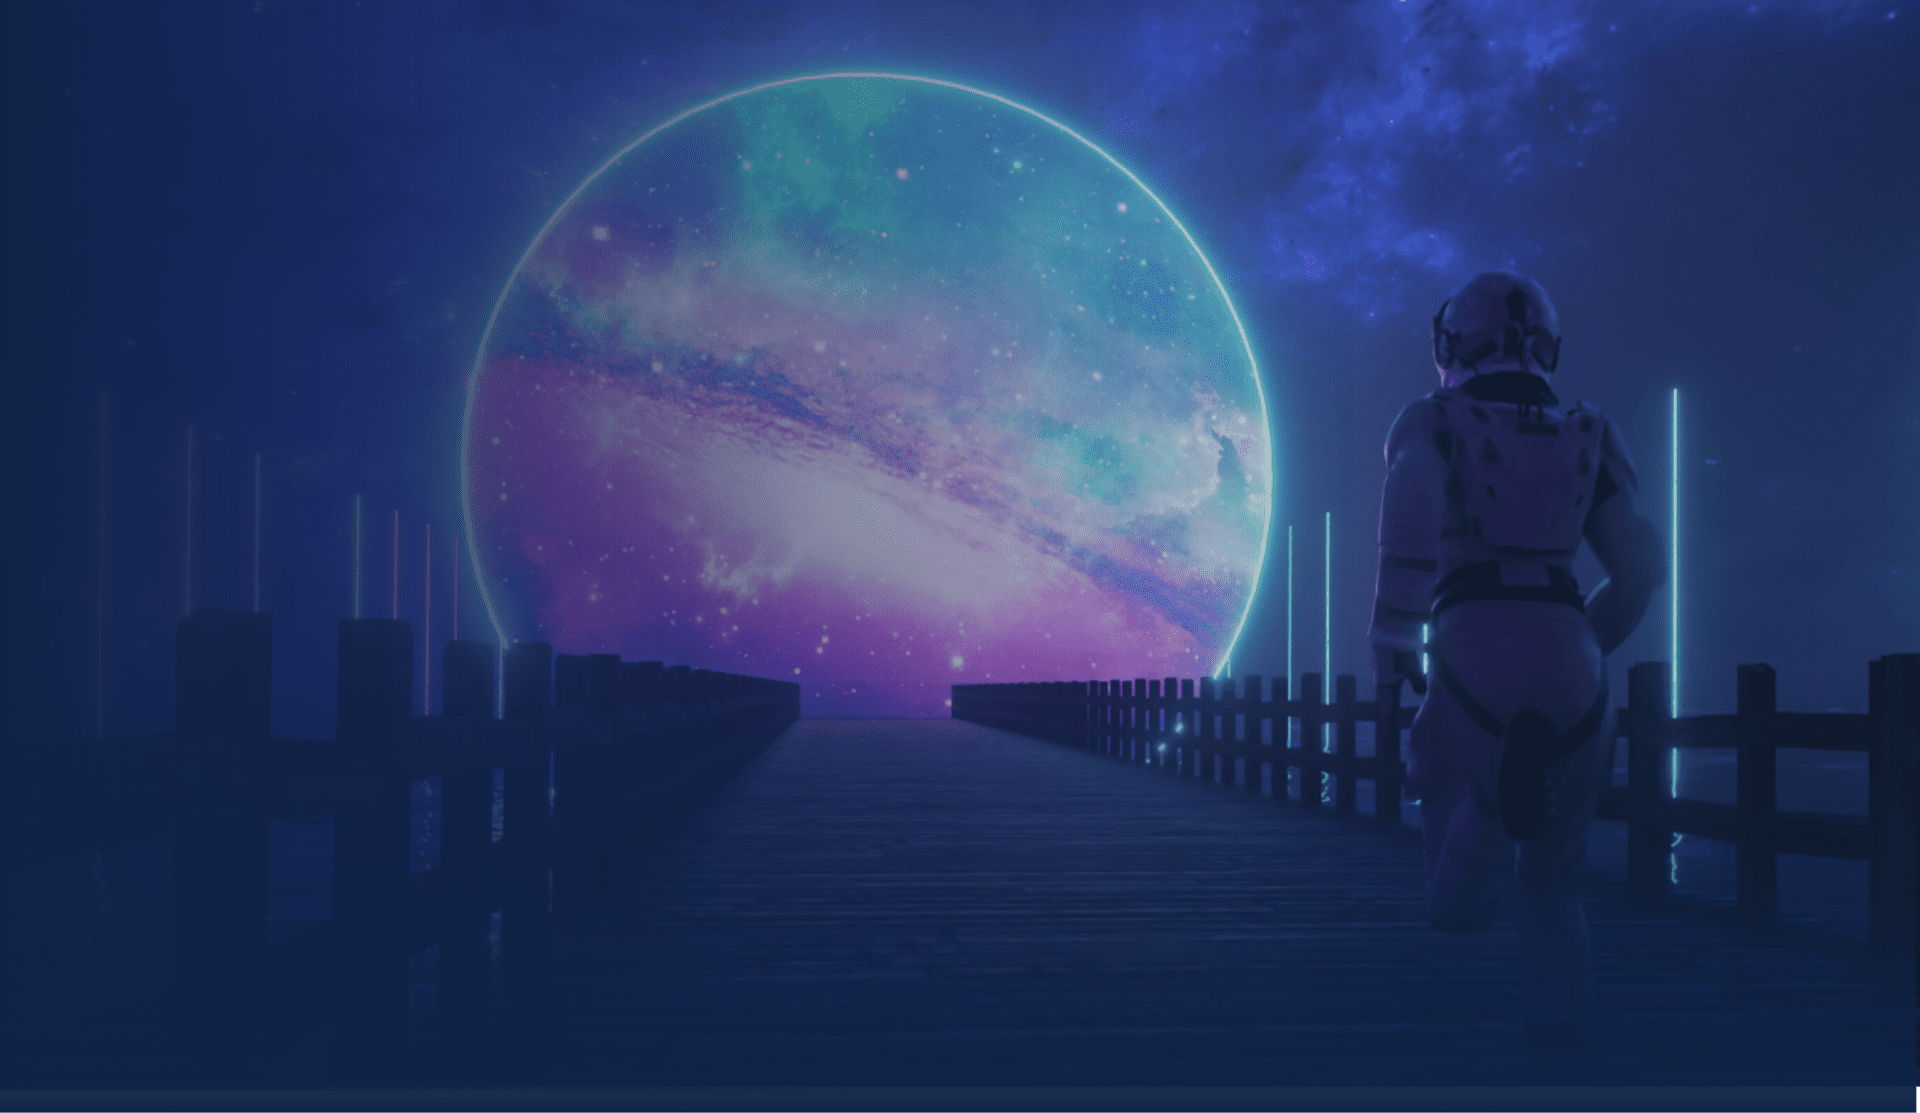 Image of an astronaut watching an illuminated planet.